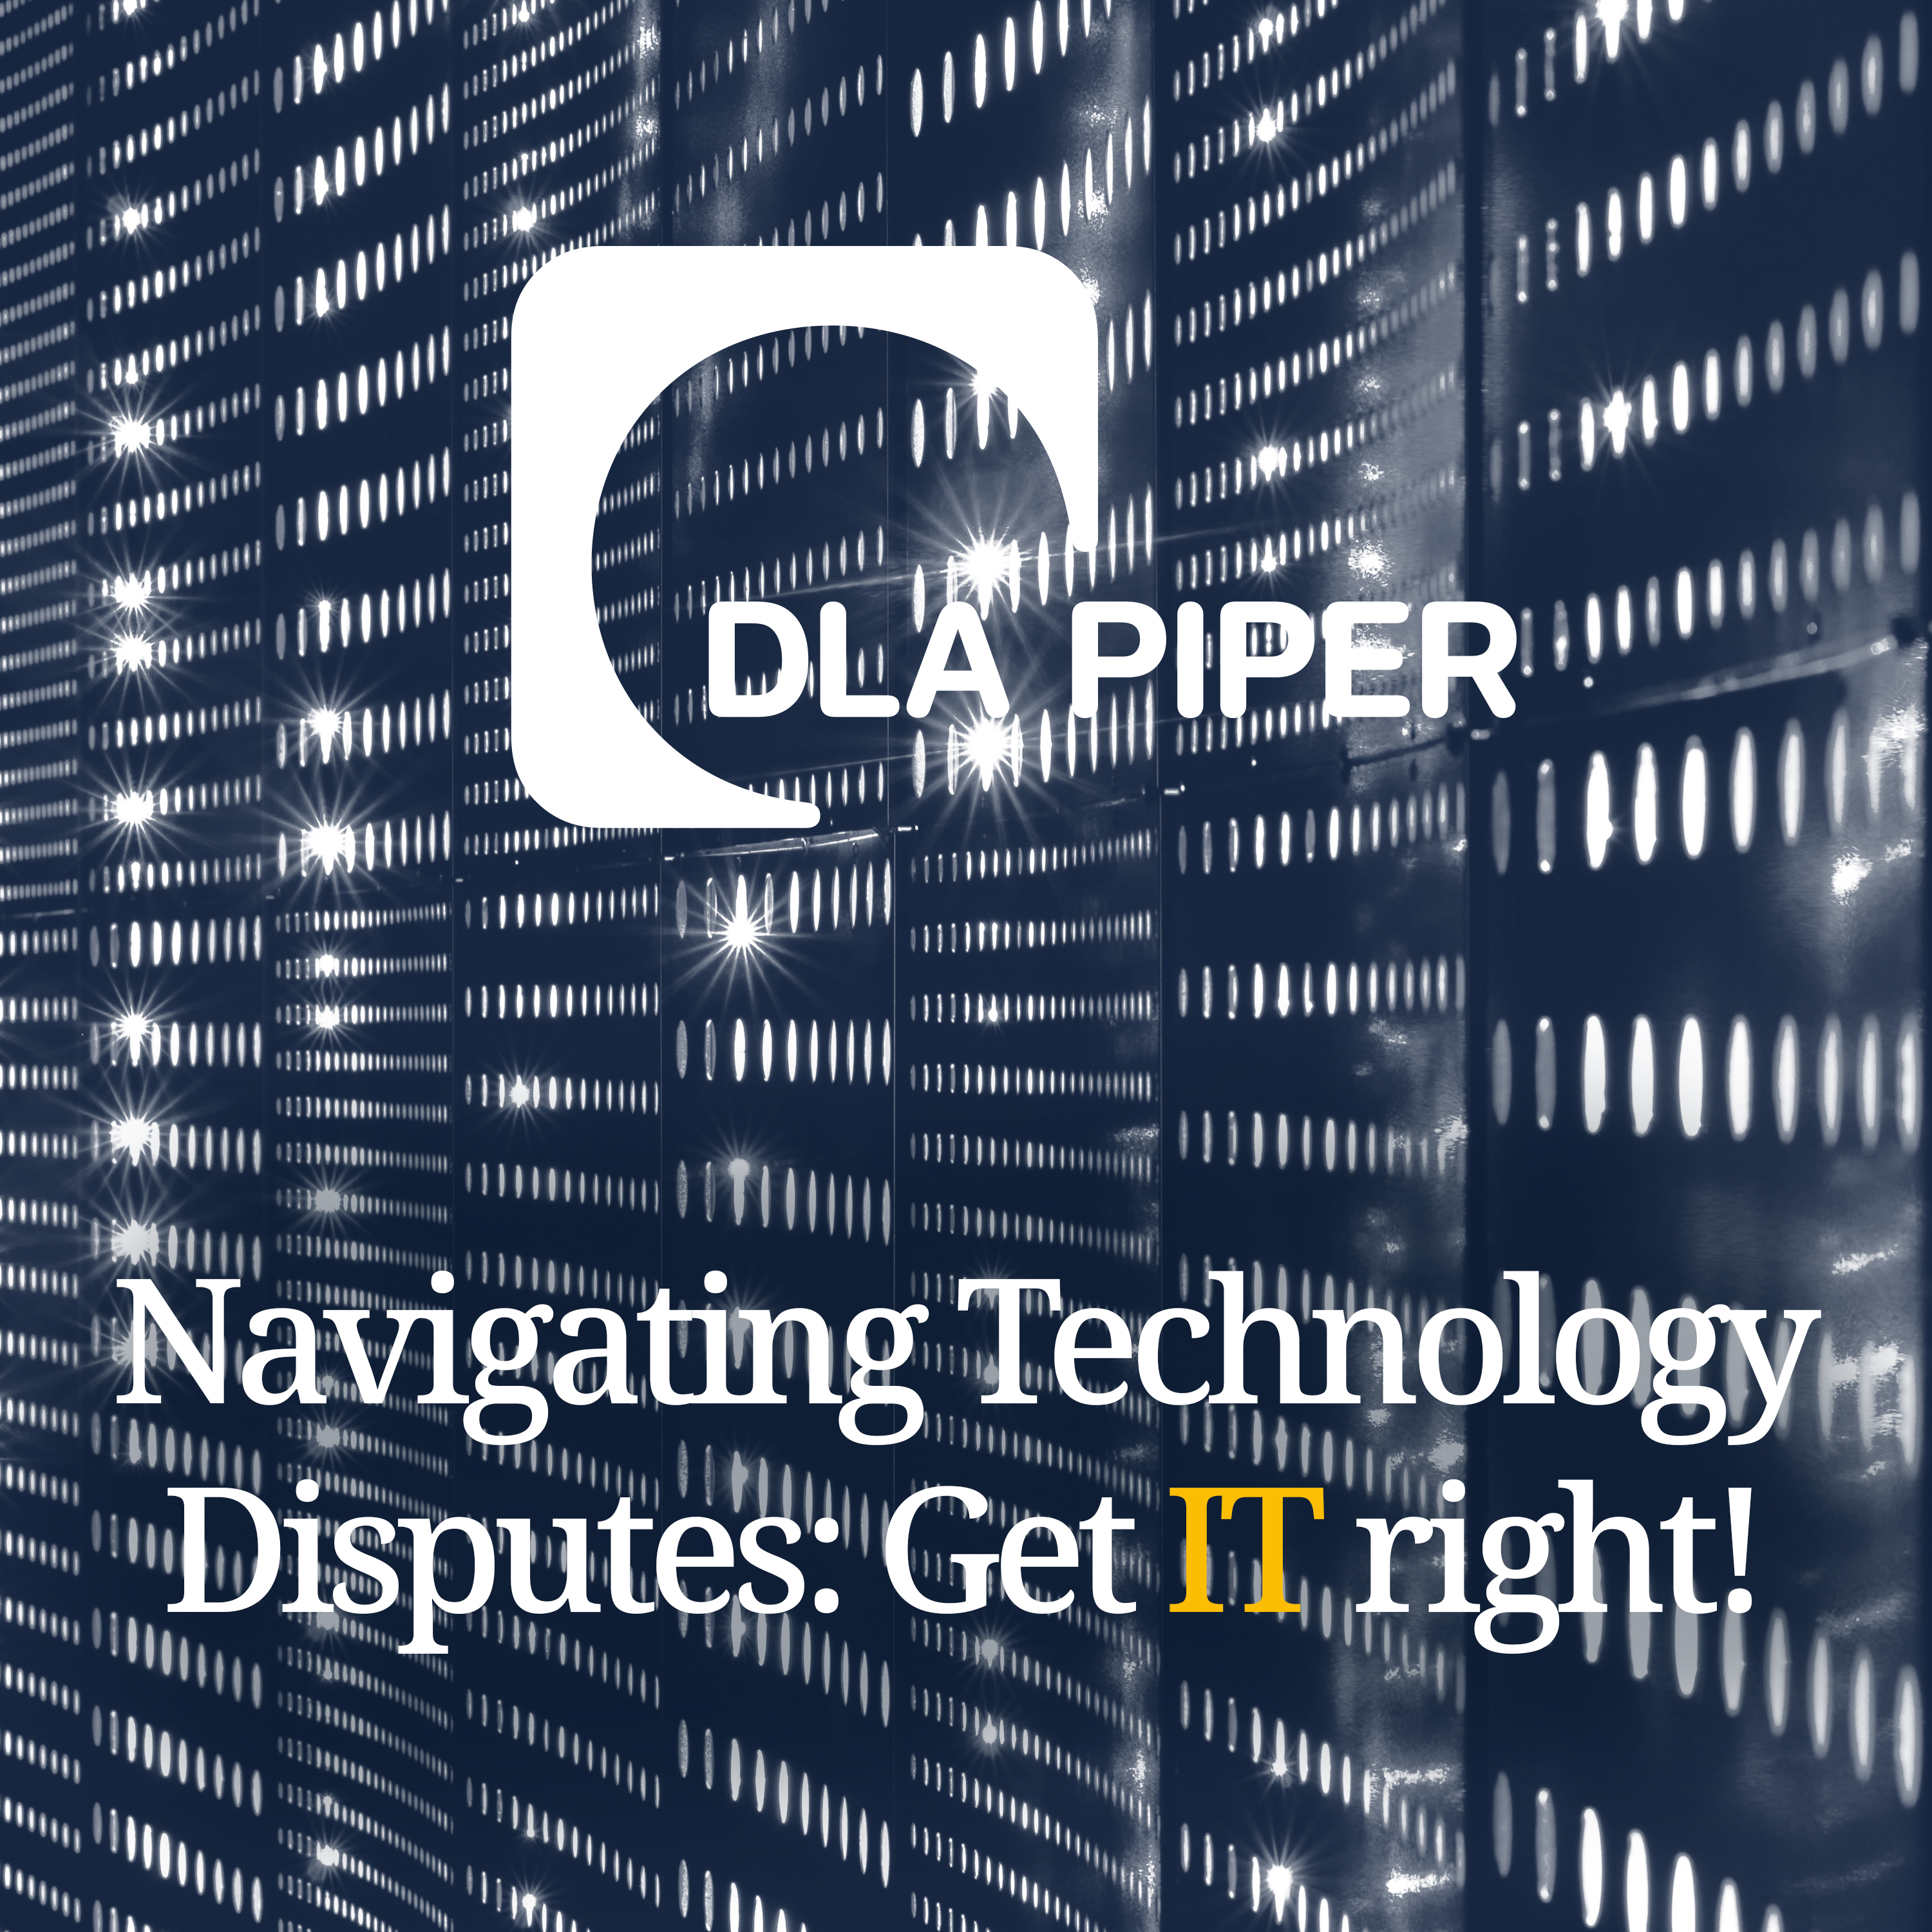 Navigating Technology Disputes: Get IT right!